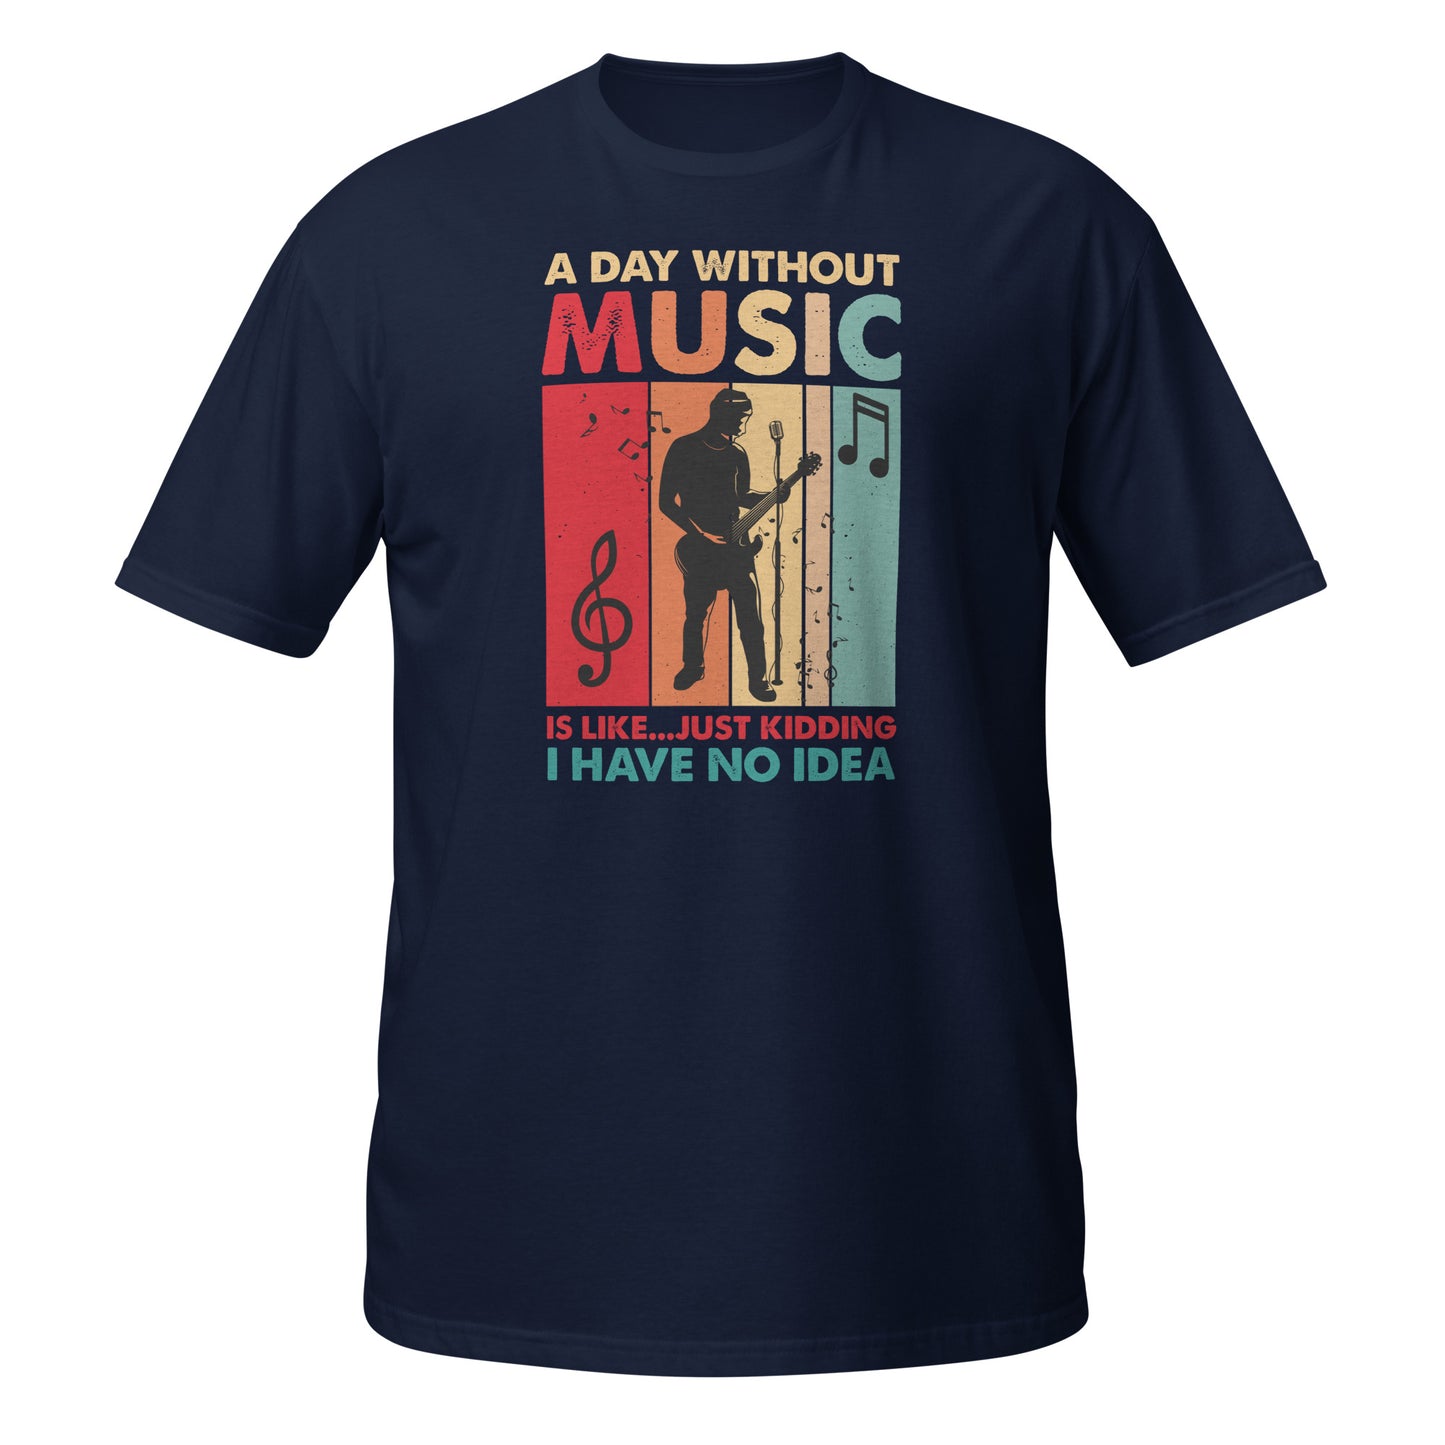 A Day Without Music Is Like... Just Kidding I Have No Idea Shirt